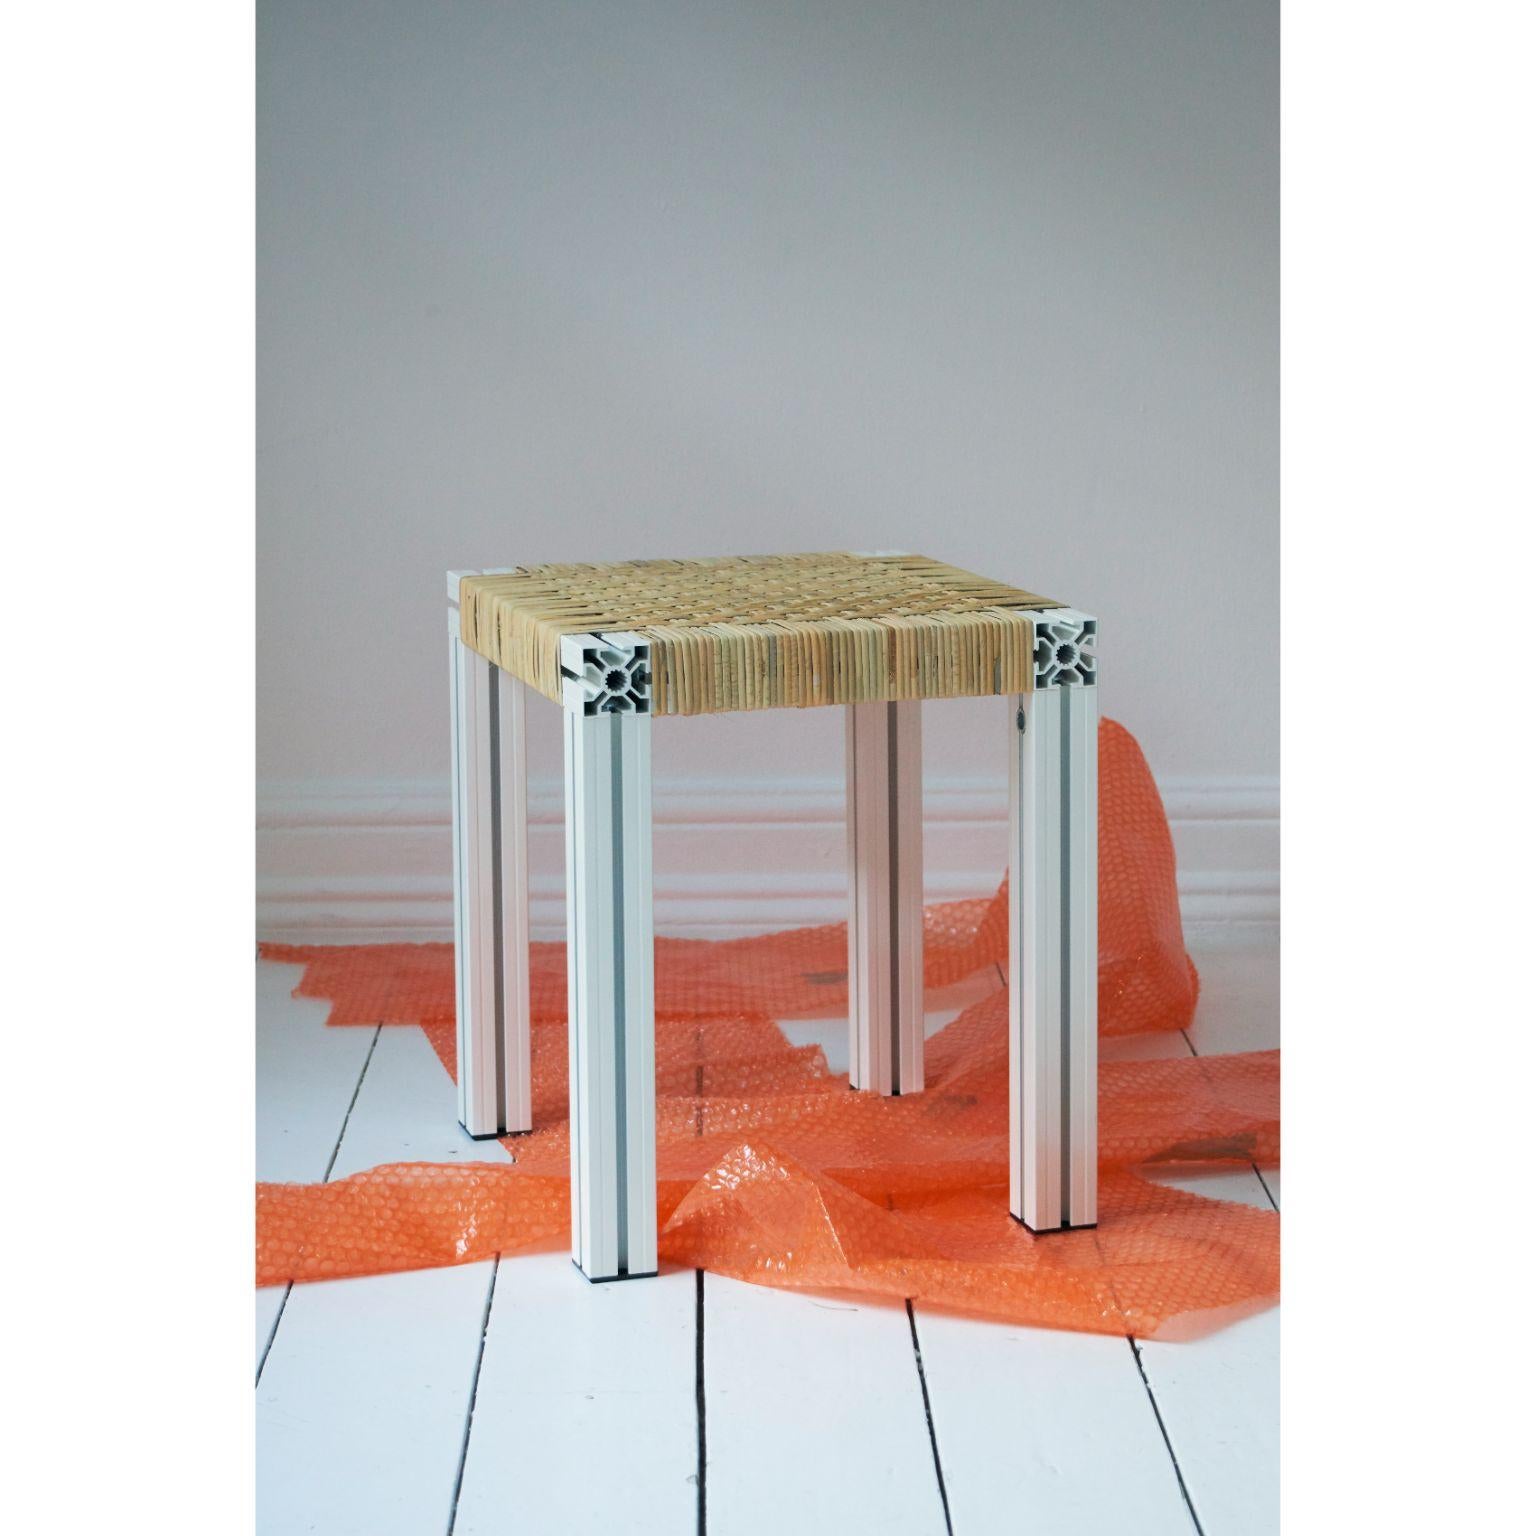 Powder Coated white and cane wicker stool by Tino Seubert
Dimensions: D 43 x W 38 x H 45 cm.
Materials: Powder coated aluminum extrusions, cane weave.

Tino Seubert
When he first made his now signature wicker and aluminium stools and benches in